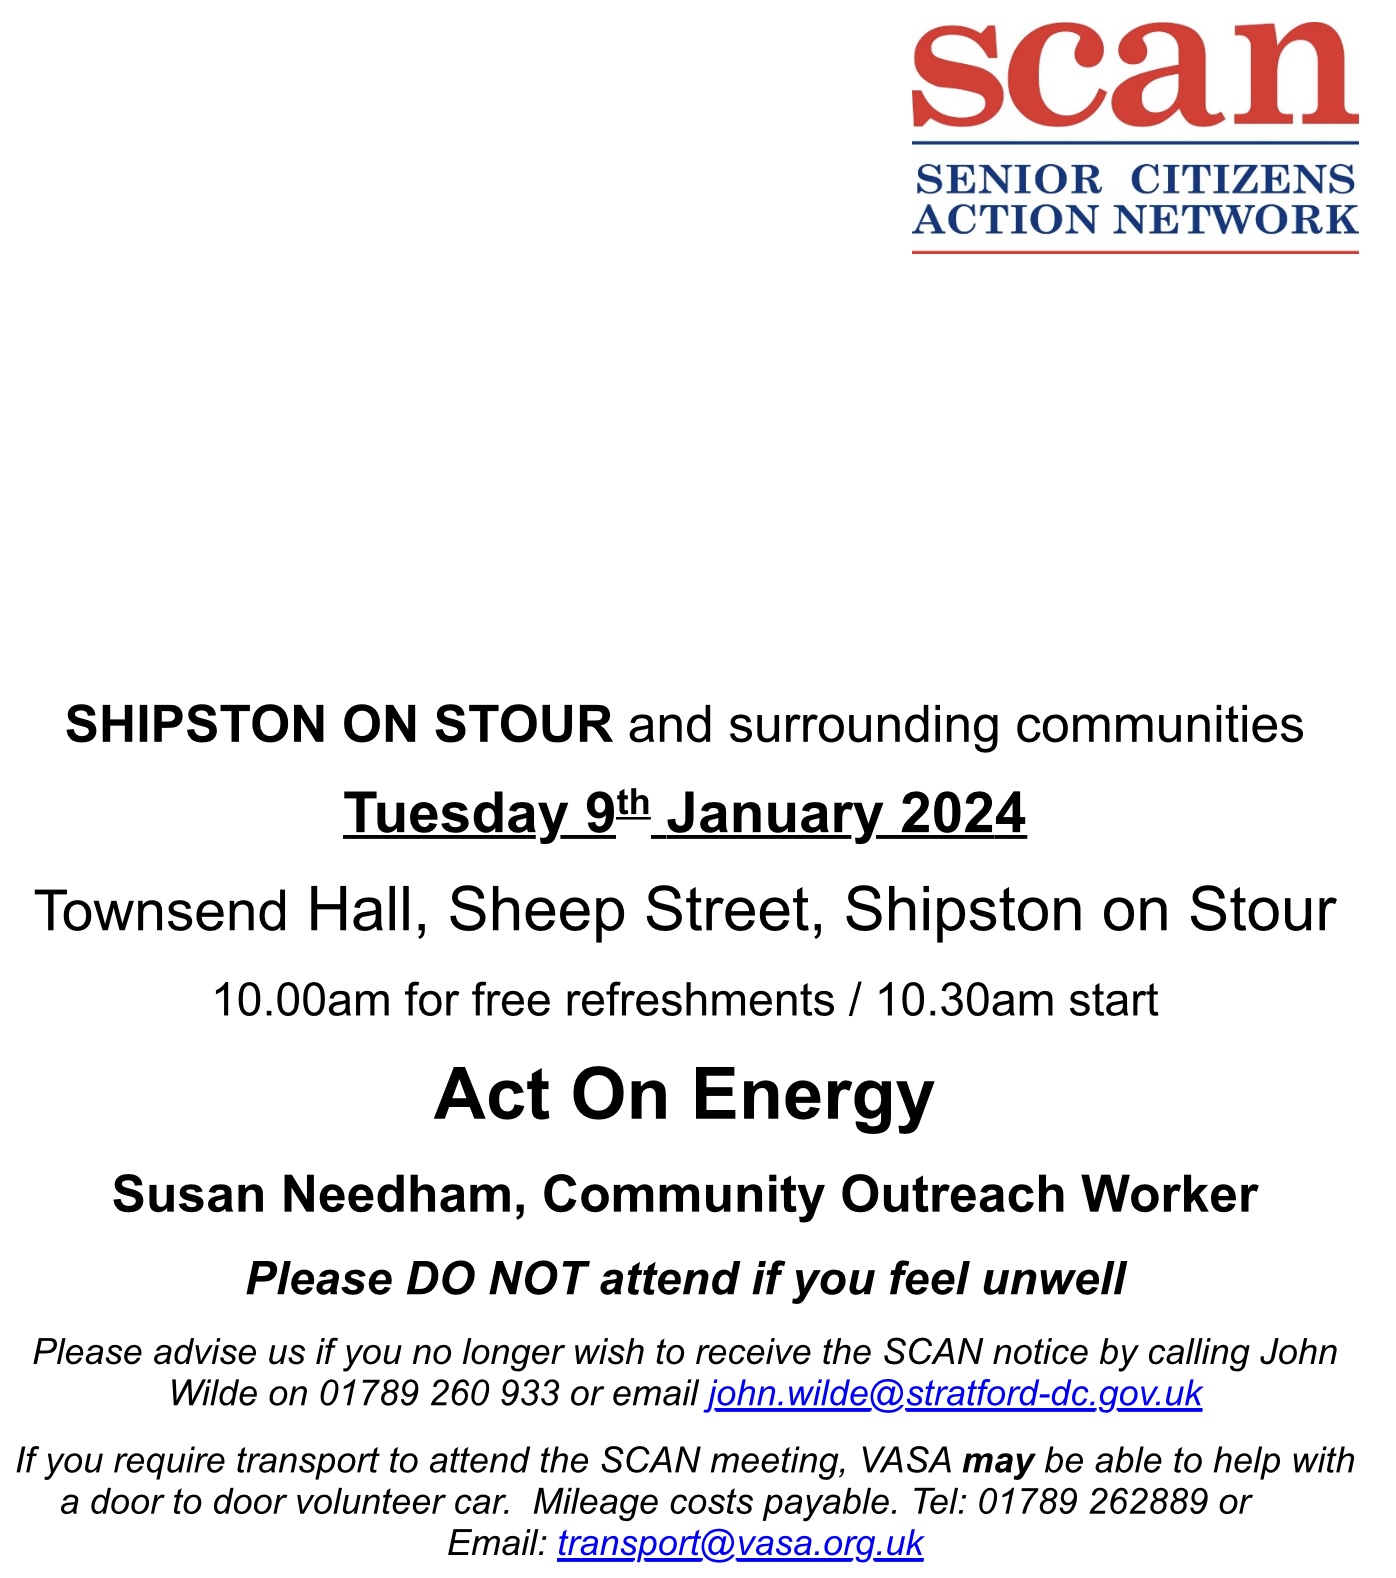 SCAN - Senior Citizens Action Network Tuesday 9 January